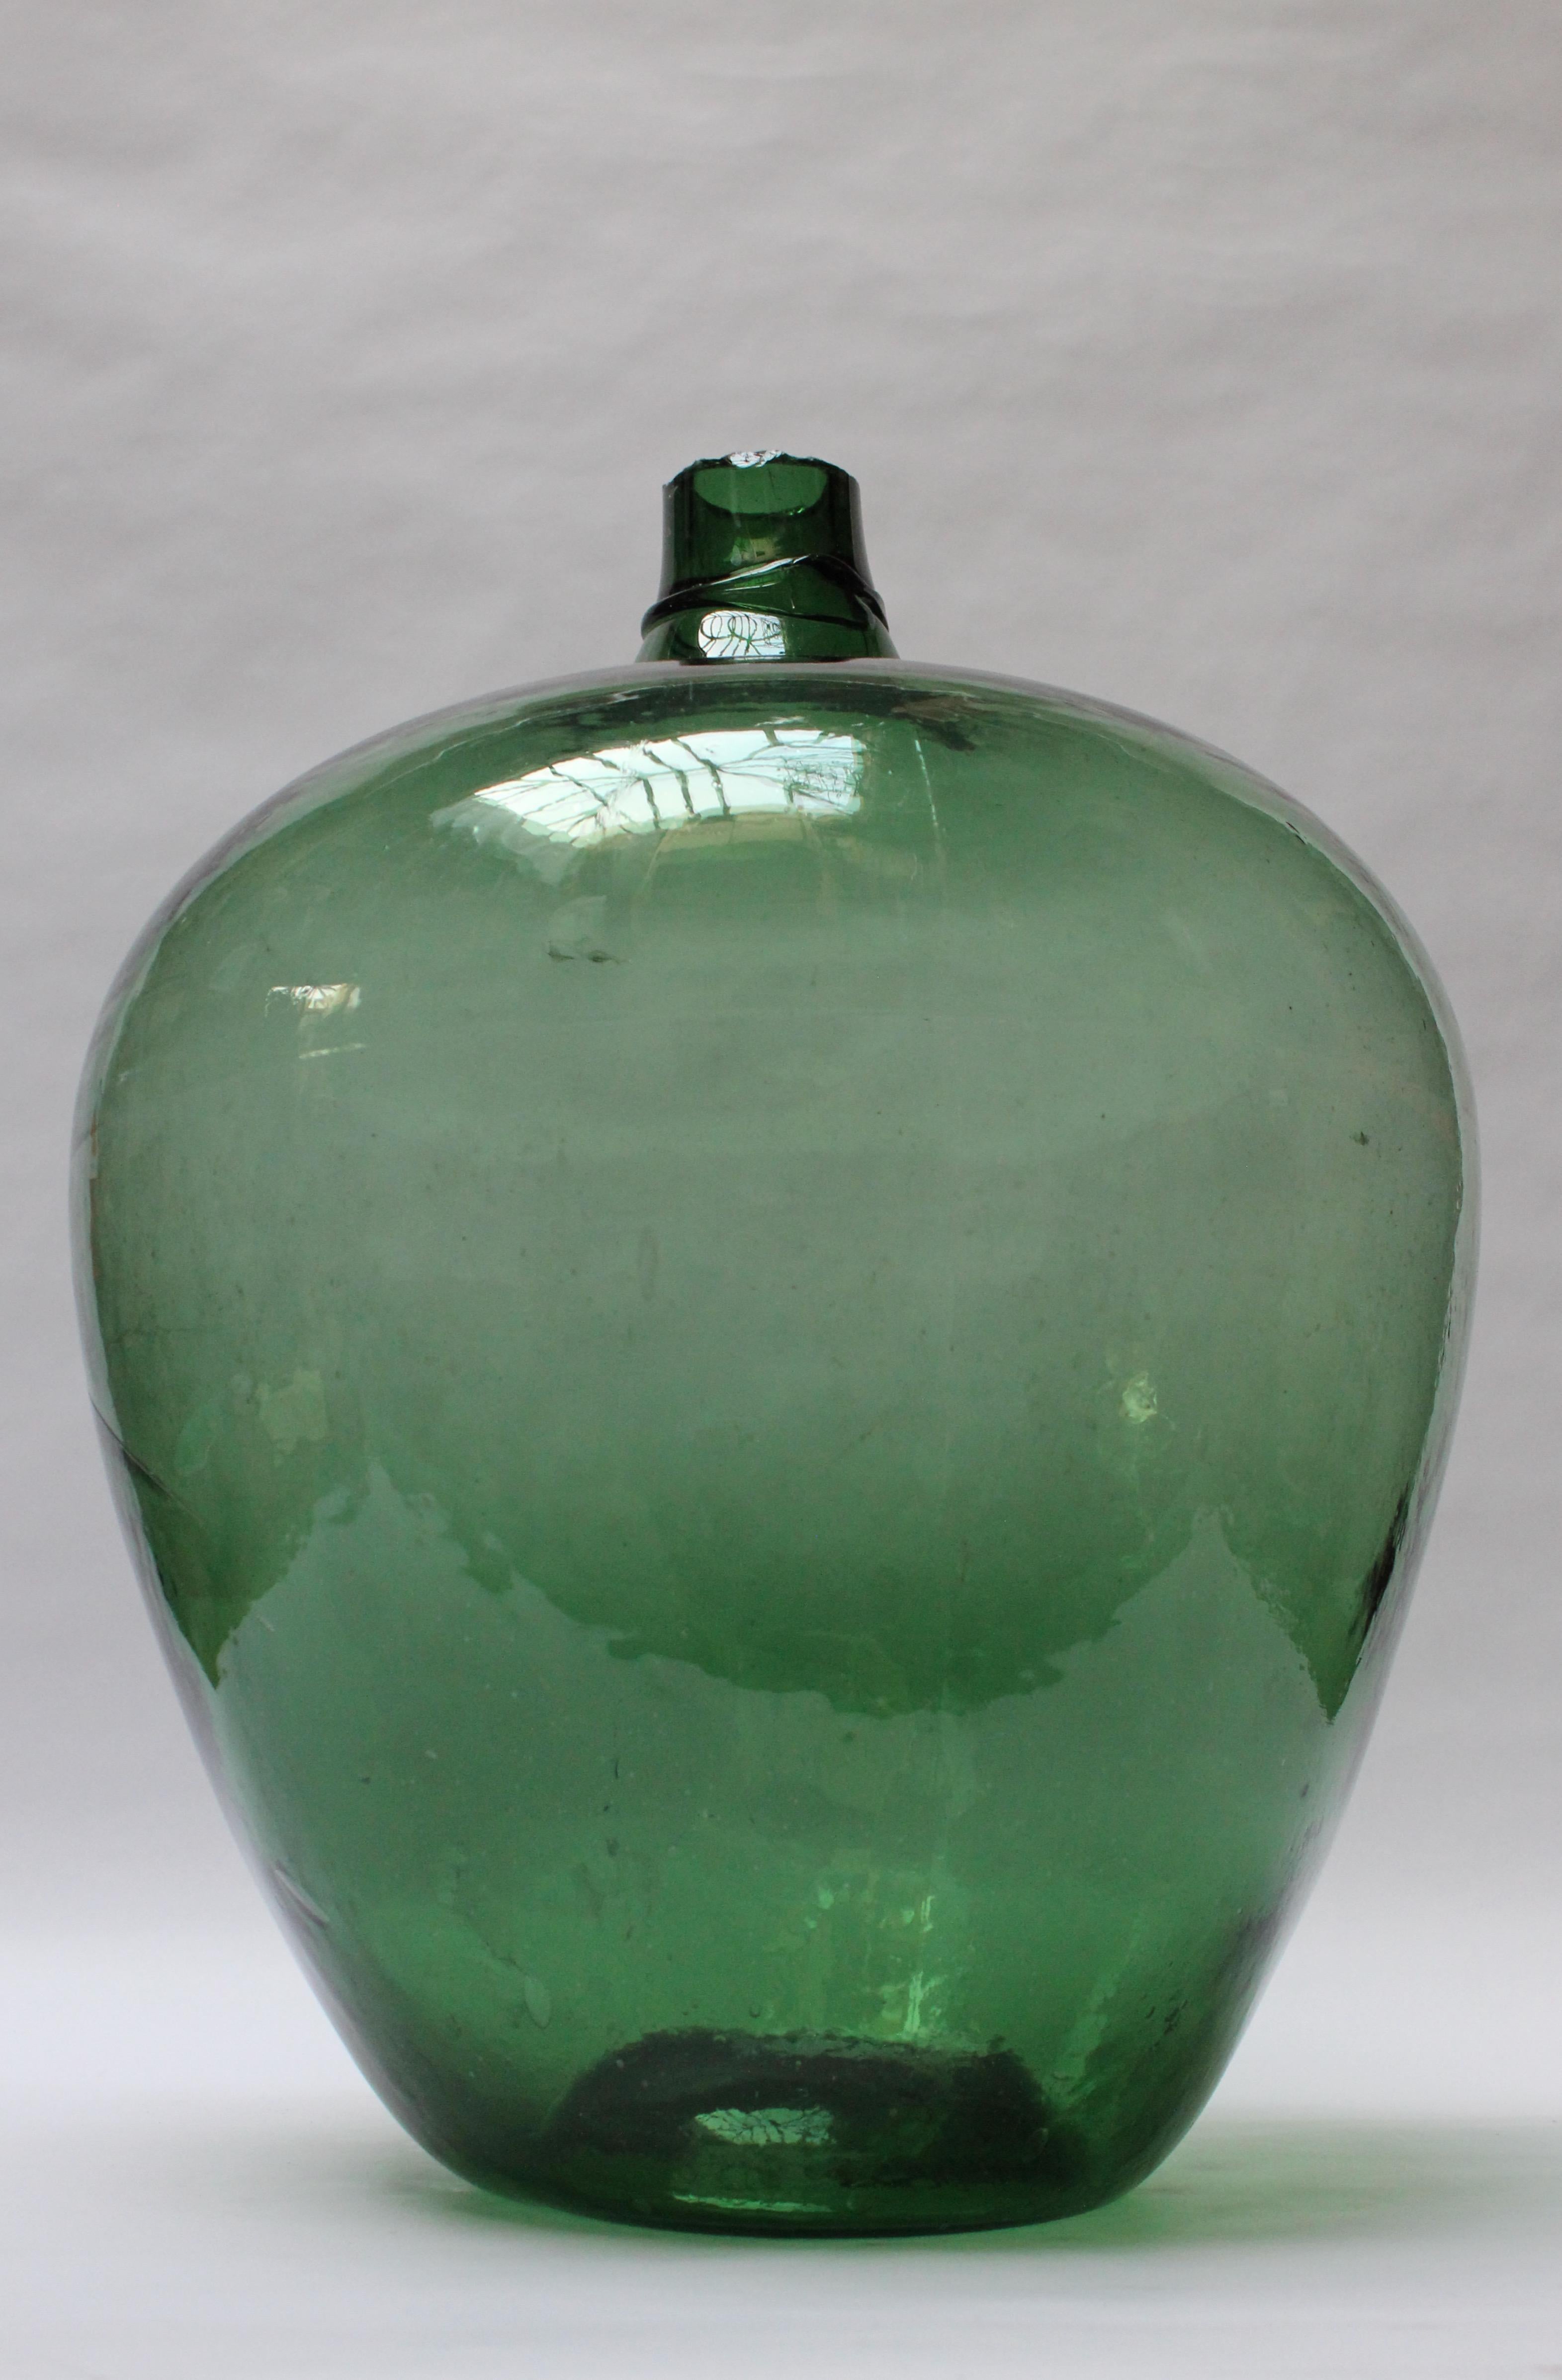 Graceful antique French demijohn / carboy originally used for transporting wine (ca. early 19th Century, France). Composed of mouth blown glass with emerald hue exhibiting trapped air bubbles within the glass itself with a sheared lip and applied